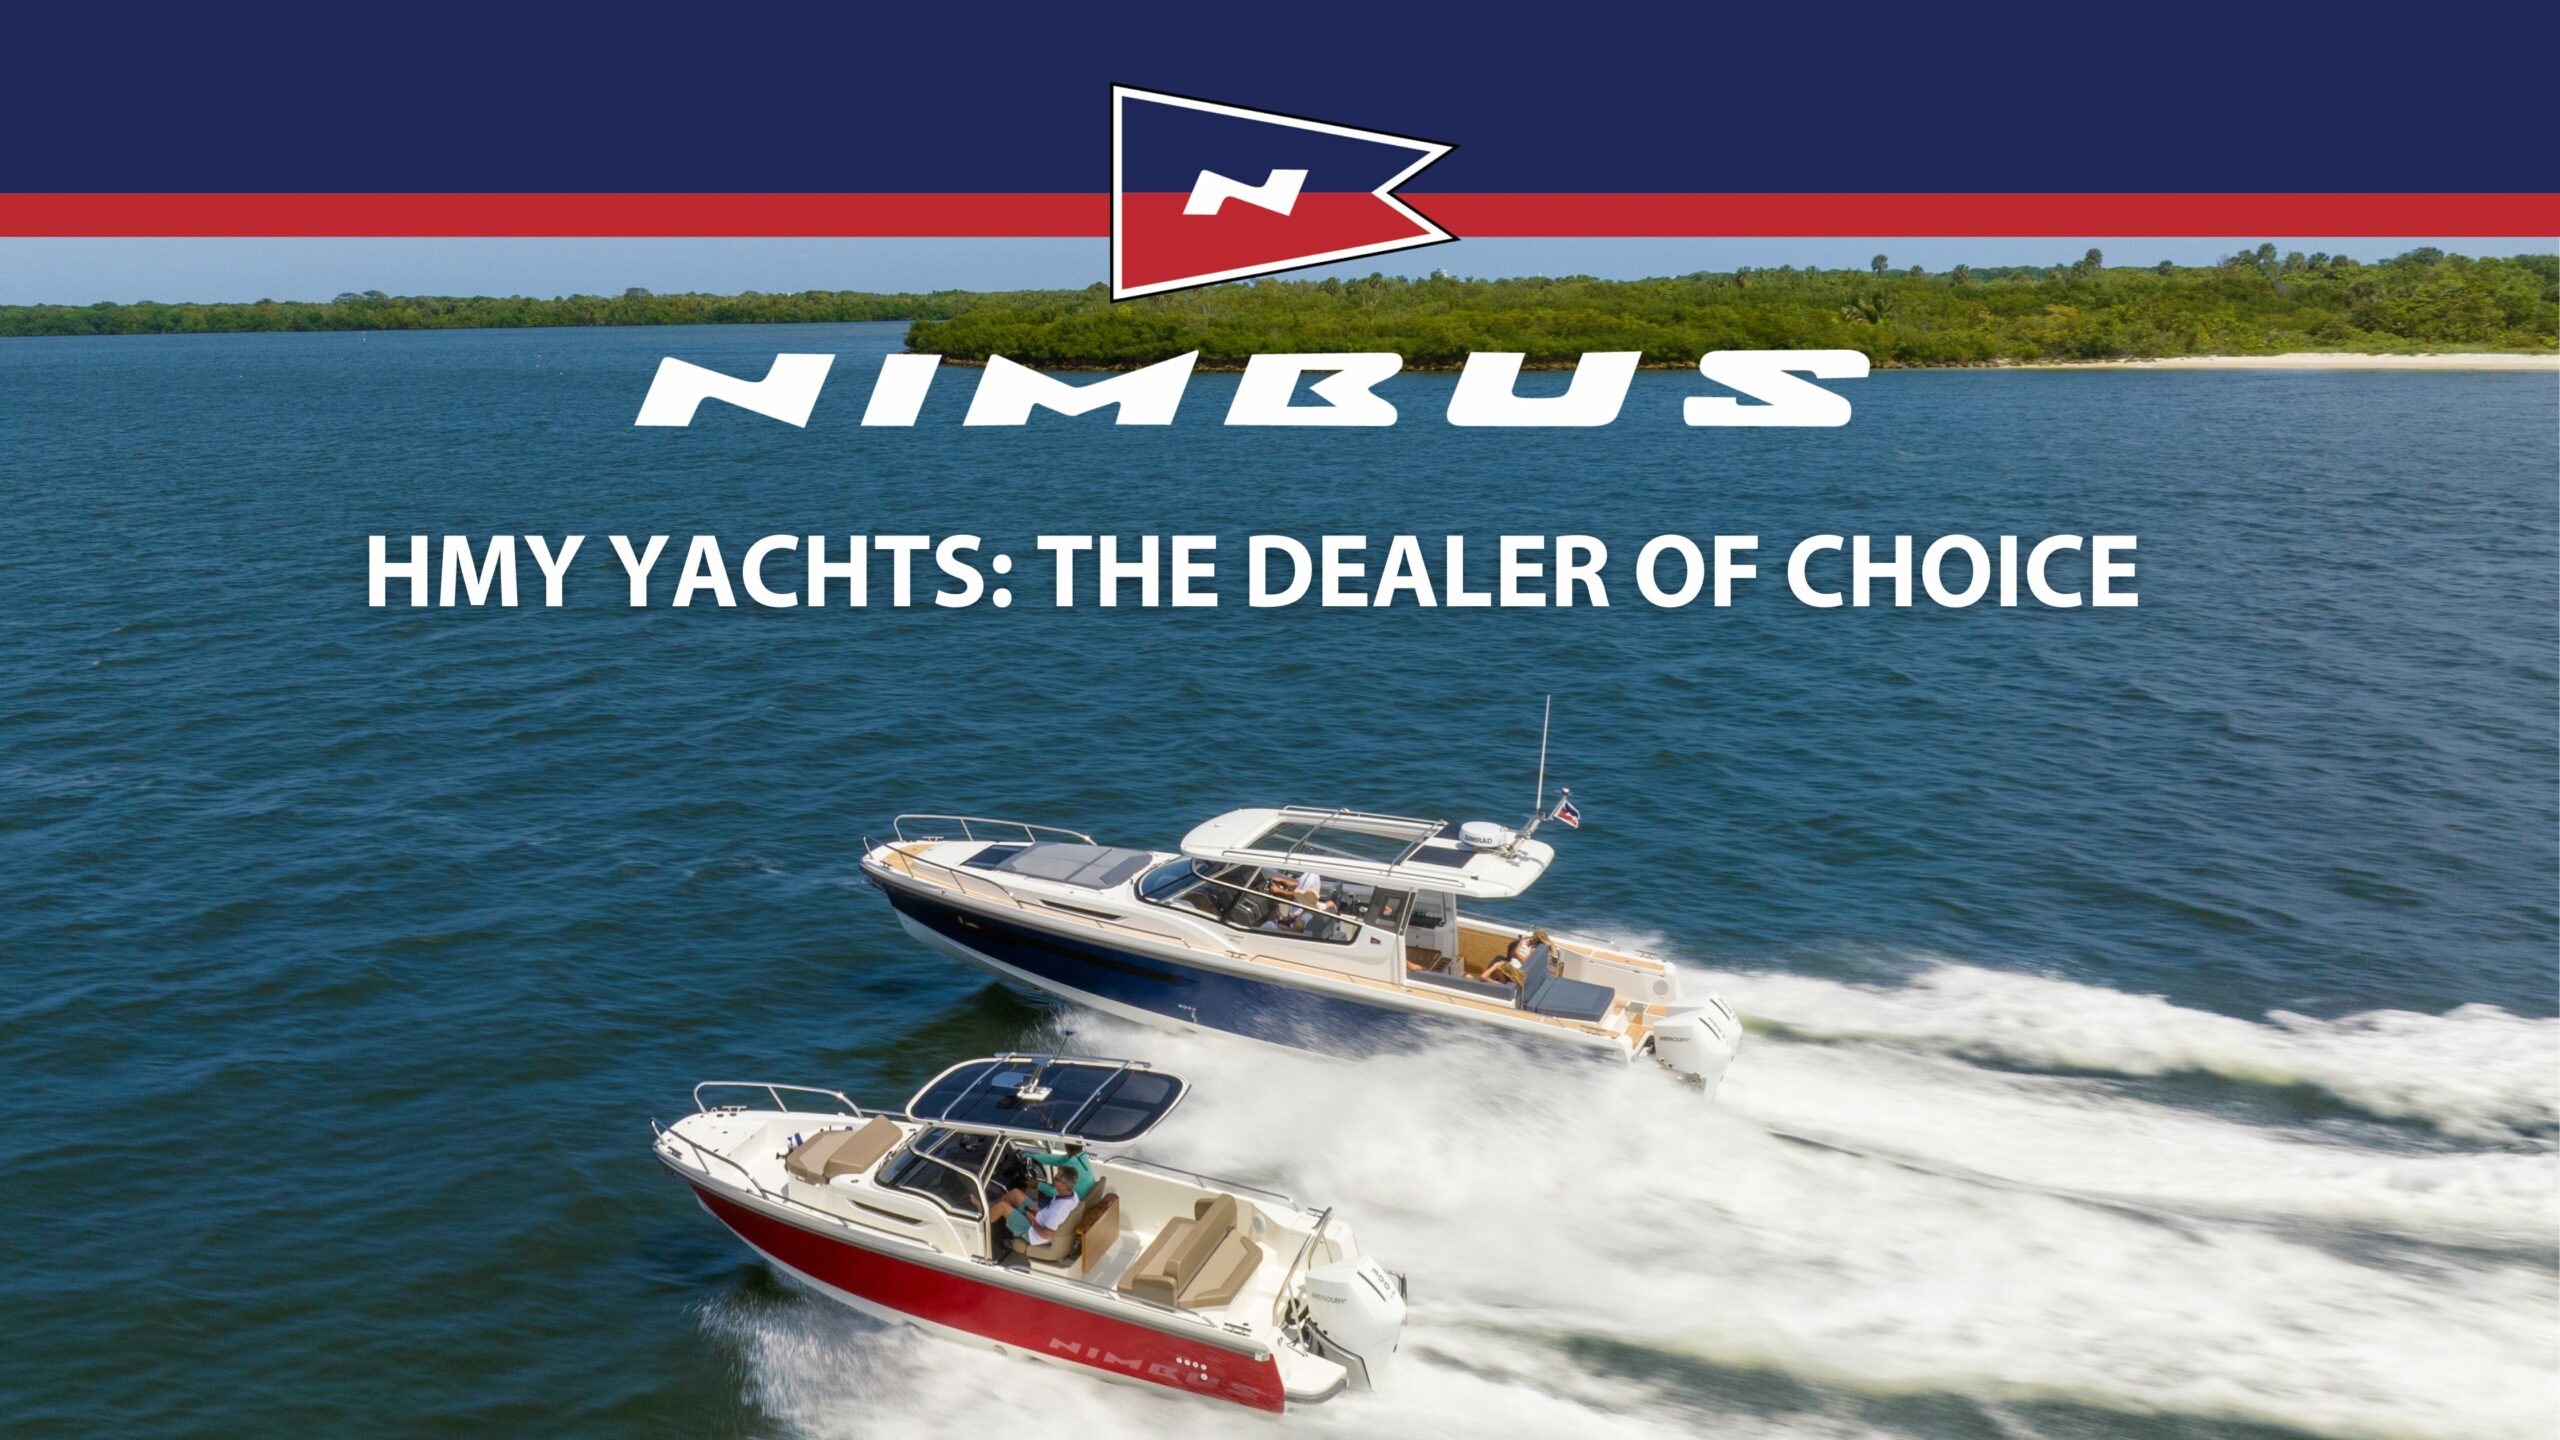 What Makes HMY the U.S. Nimbus Dealer of Choice?